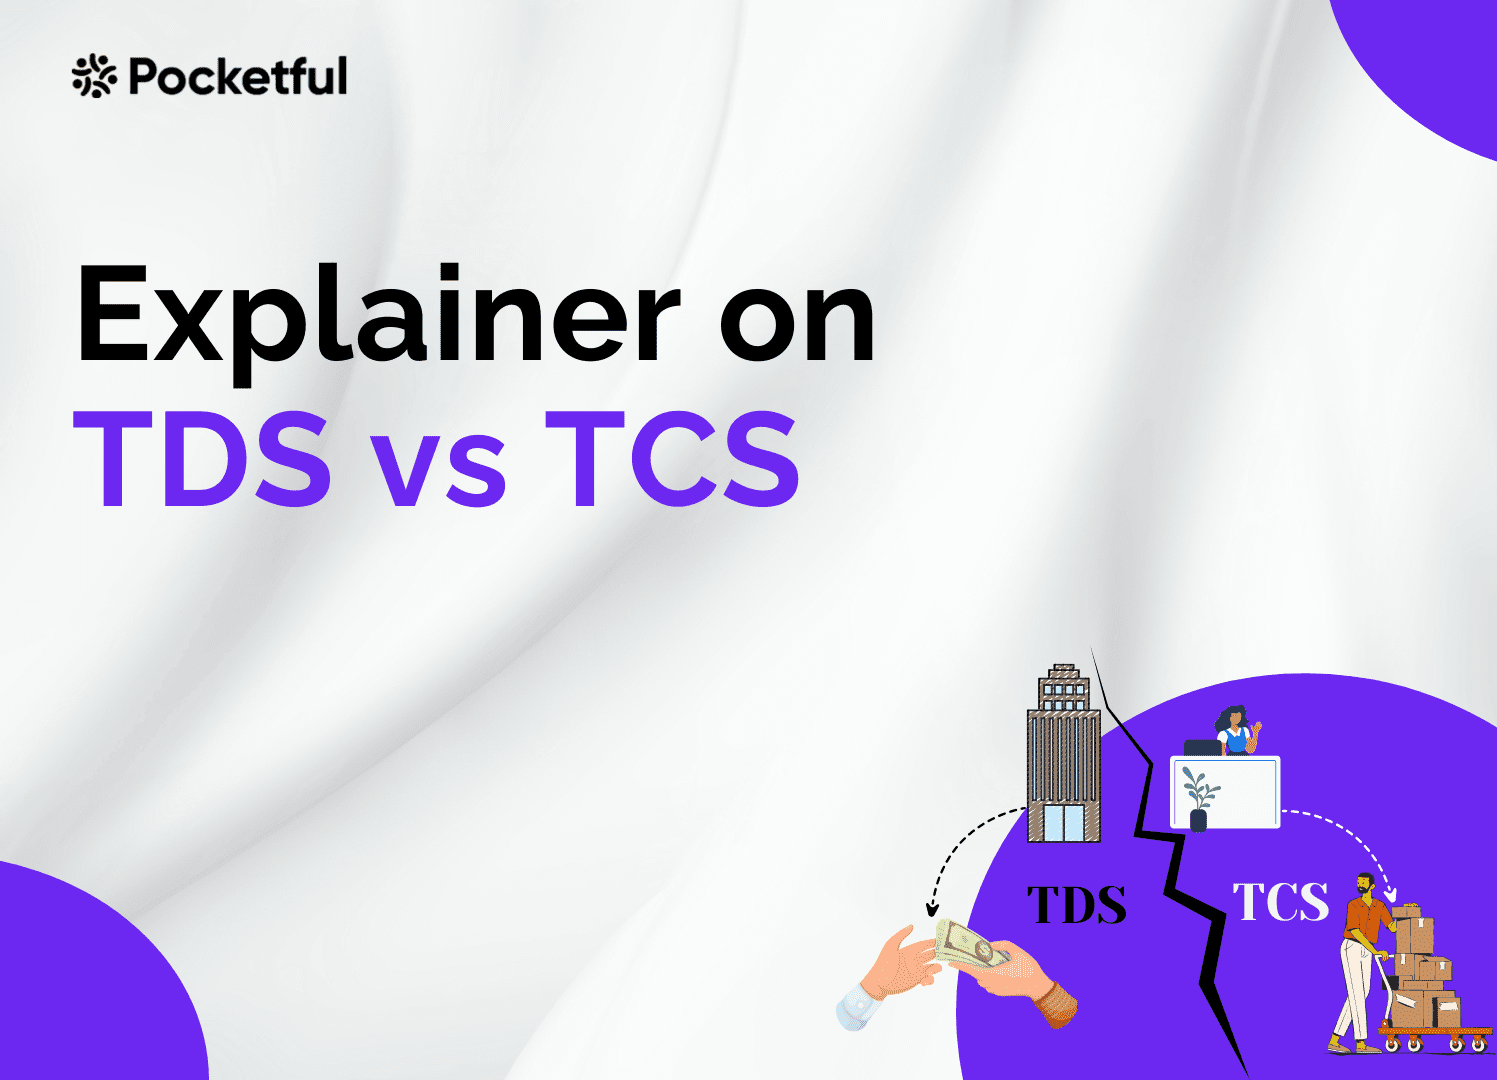 What Is The Difference Between TDS and TCS?